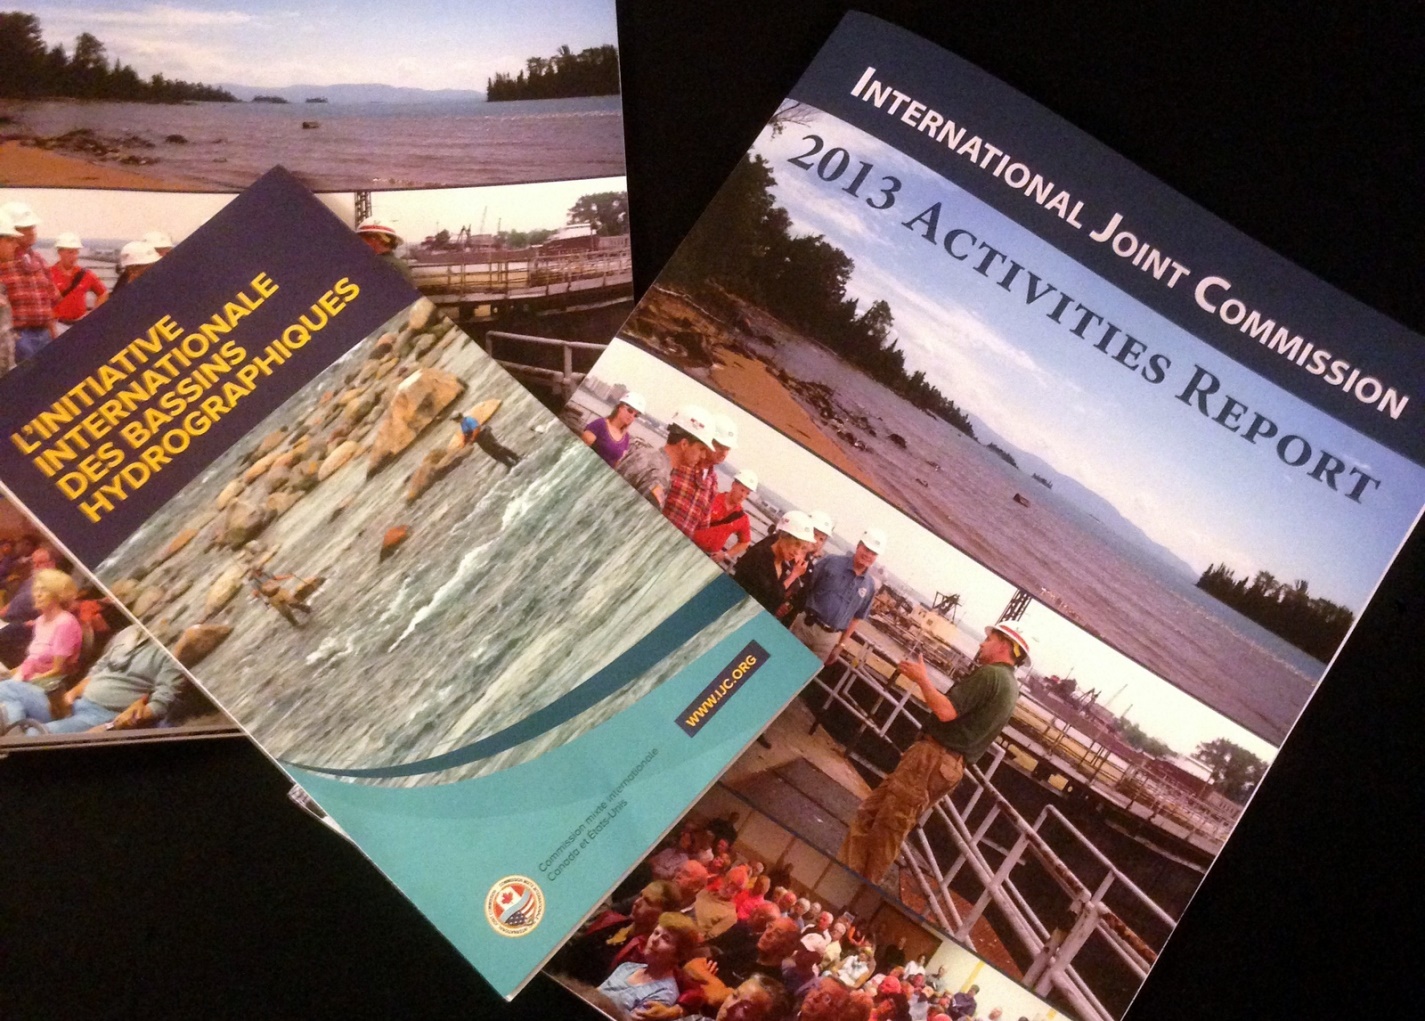 A copy of the 2013 Activities Report, at right, and a brochure from earlier this year on the International Watersheds Initiative.